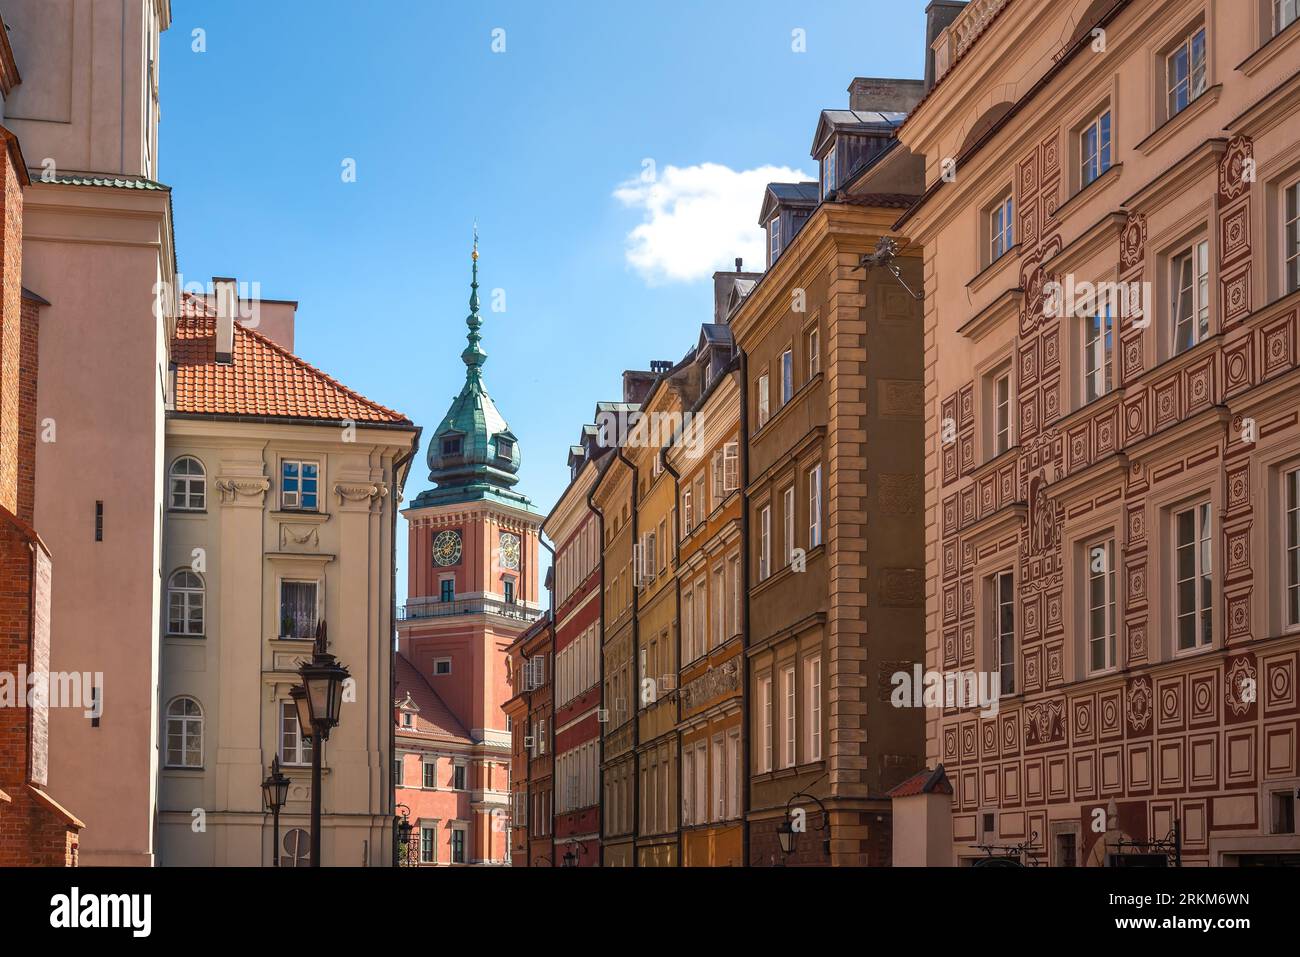 Street in old town with Royal Castle Clock Tower - Warsaw, Poland Stock Photo